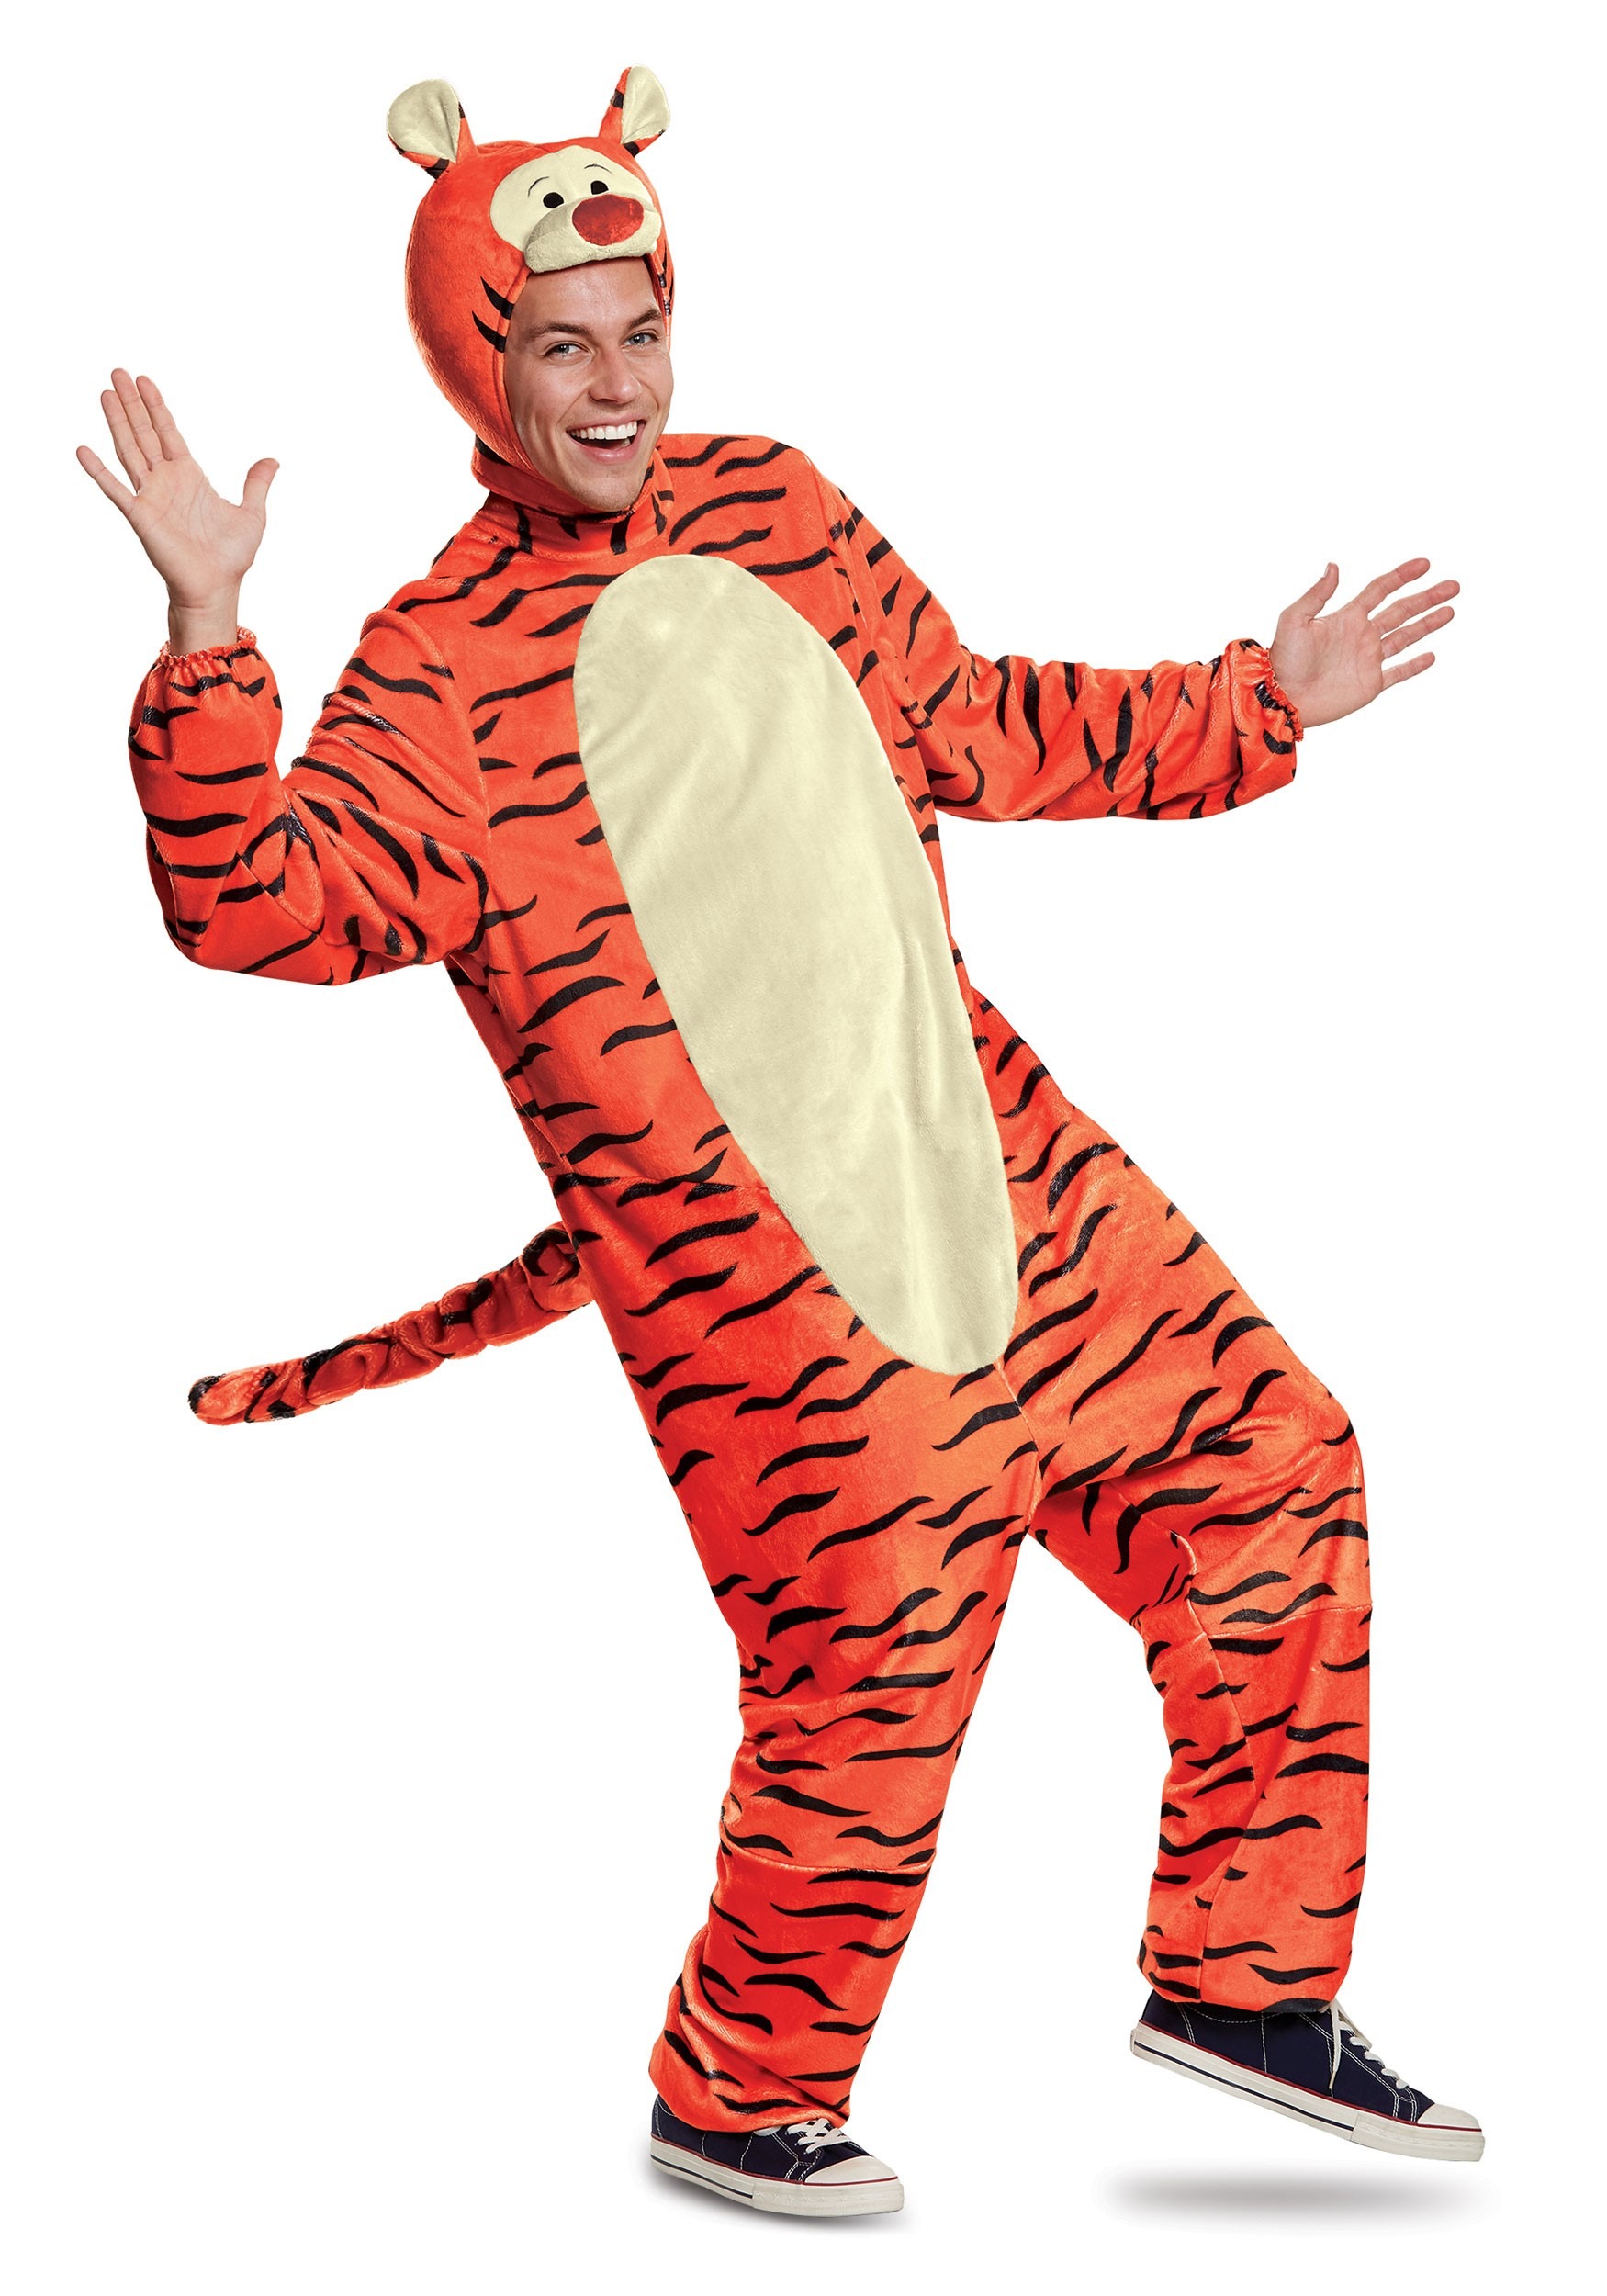 Photos - Fancy Dress Deluxe Disguise Limited Winnie the Pooh Adult Tigger   Costume B 